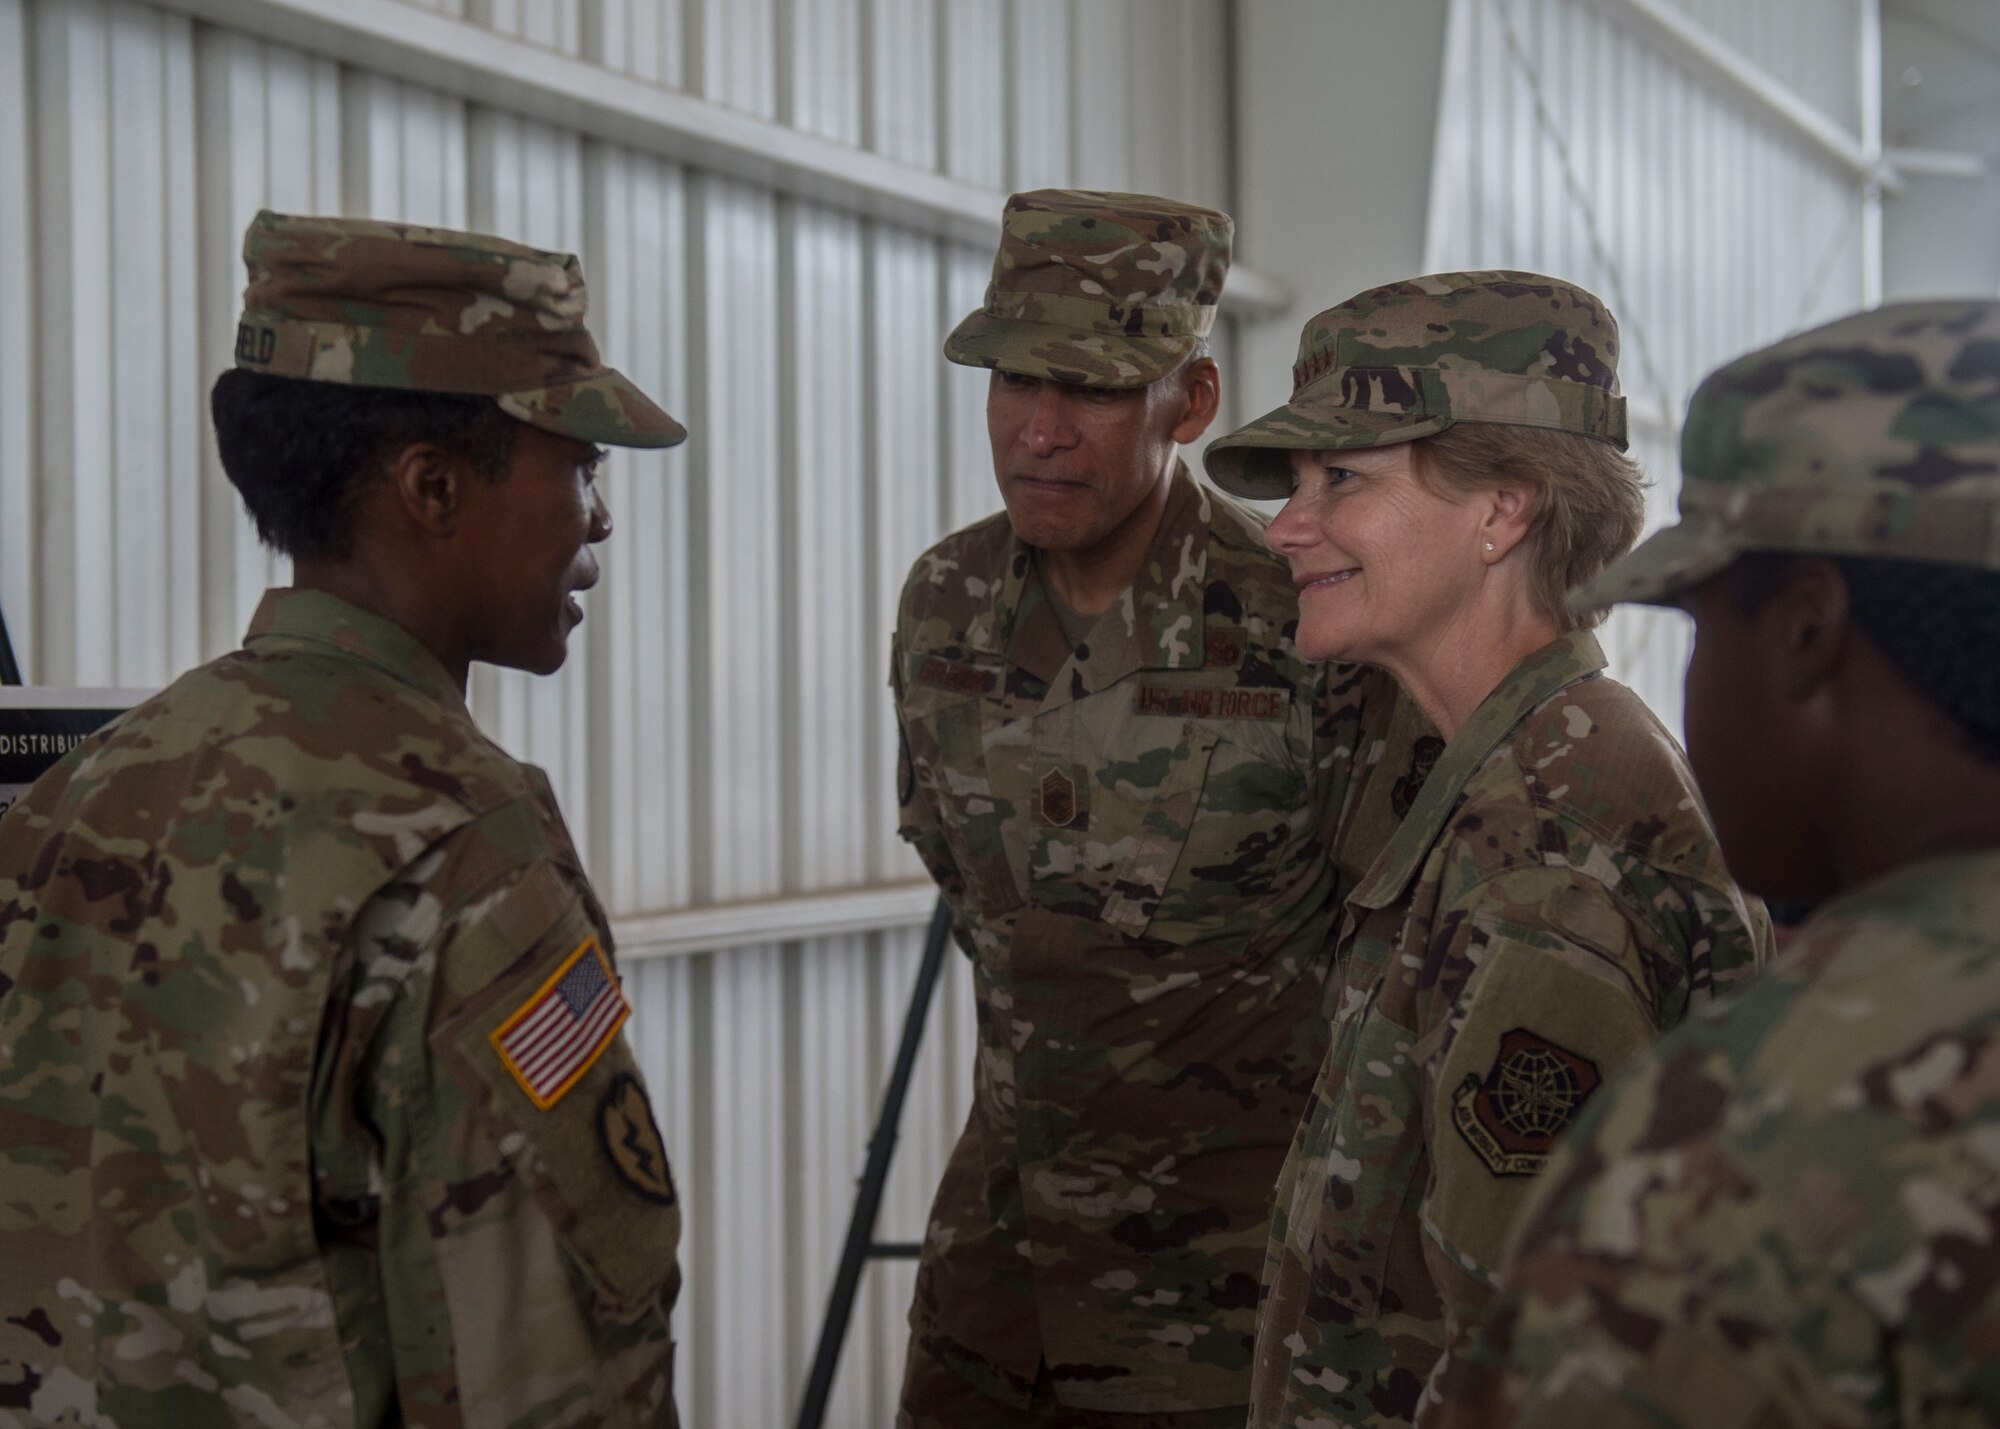 U.S. Army Lt. Col. Altwan Whitfield, left, commander of the 841st Transportation Battalion, gives a mission brief to Gen. Maryanne Miller, right, commander of Air Mobility Command, and Chief Master Sgt. Terrence Greene, AMC command chief master sergeant, center, during a visit to the Joint Base Charleston Naval Weapons Station, South Carolina, July 30, 2019. Miller and Greene visited JB Charleston July 29 to August 1 to get a first-hand look at mission capabilities, new innovative programs and how JB Charleston is taking care of its service members to build a stronger mobility force.  The 841st Trans. Bn.  conducts surface distribution and port clearance operations in support of combatant commanders and deployment readiness.